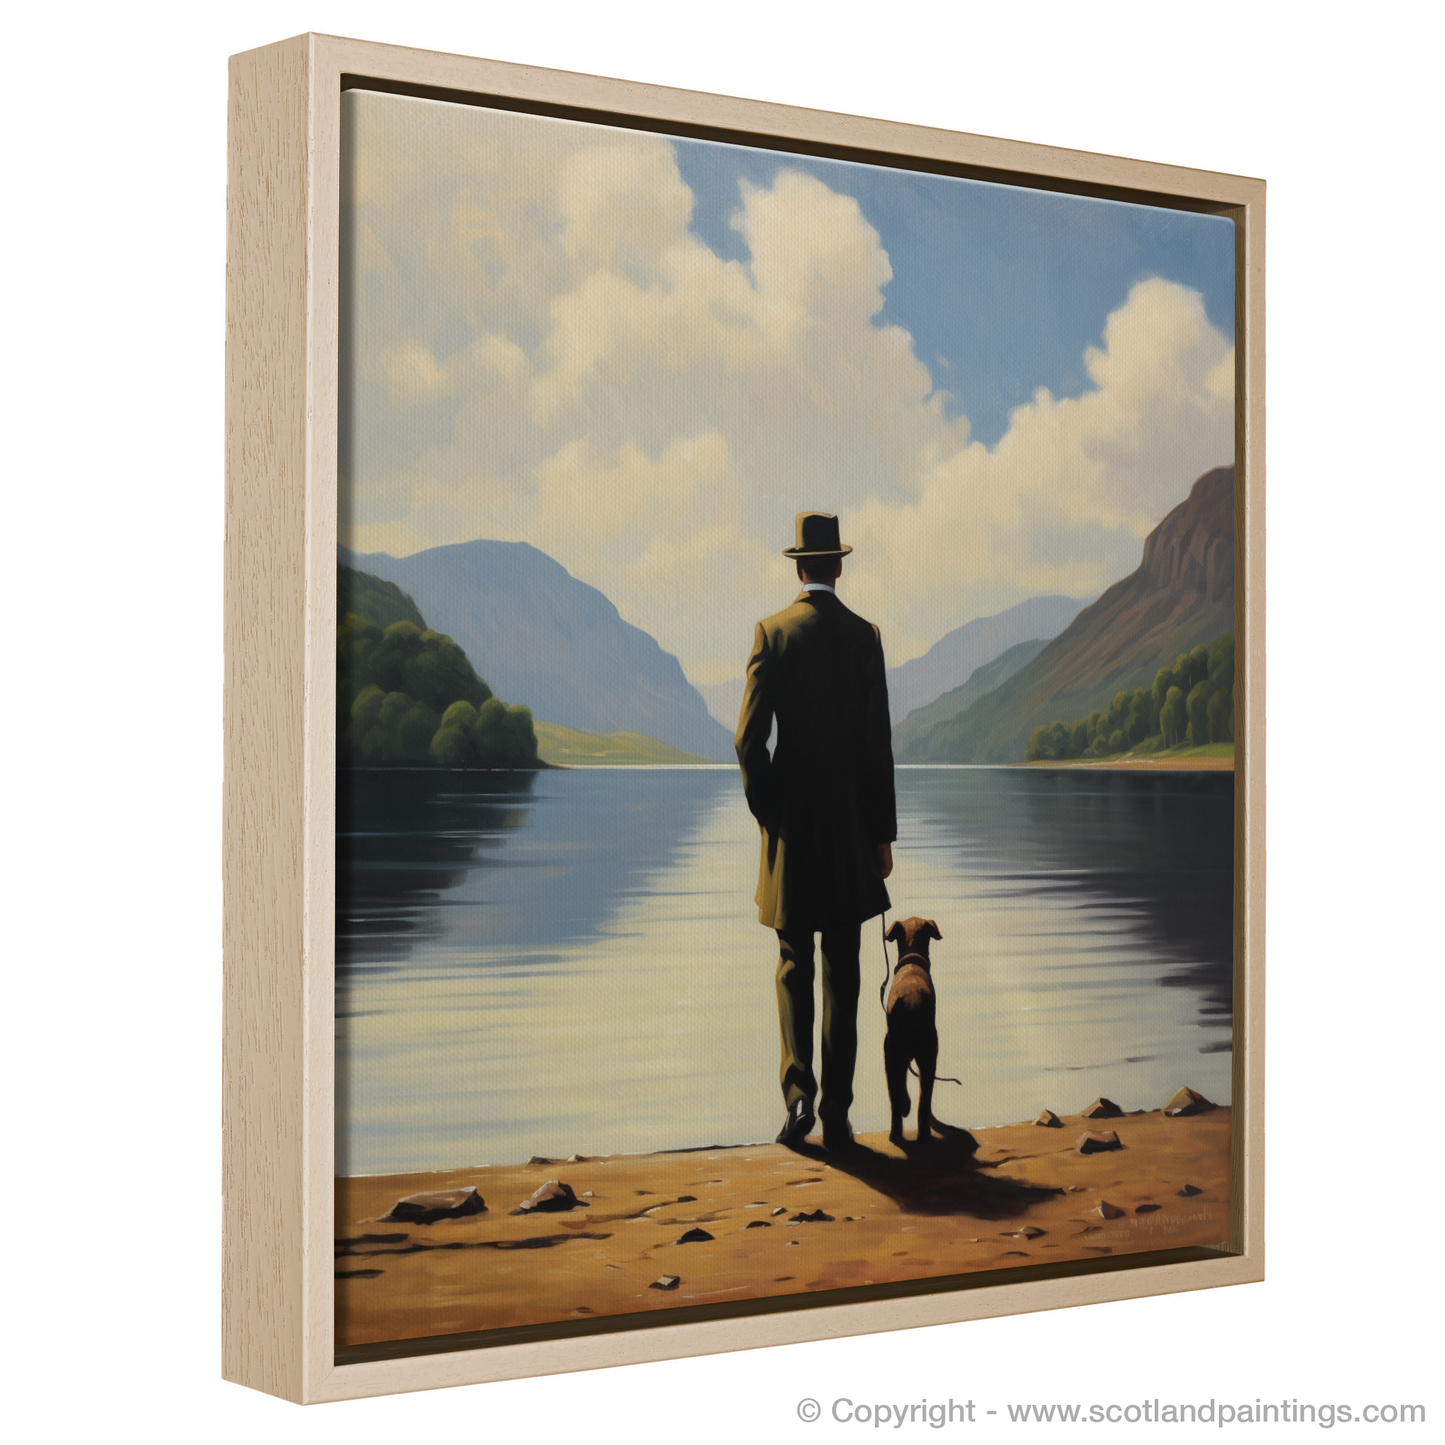 Painting and Art Print of A man walking dog at the side of Loch Lomond entitled "Man's Best Friend at Loch Lomond".